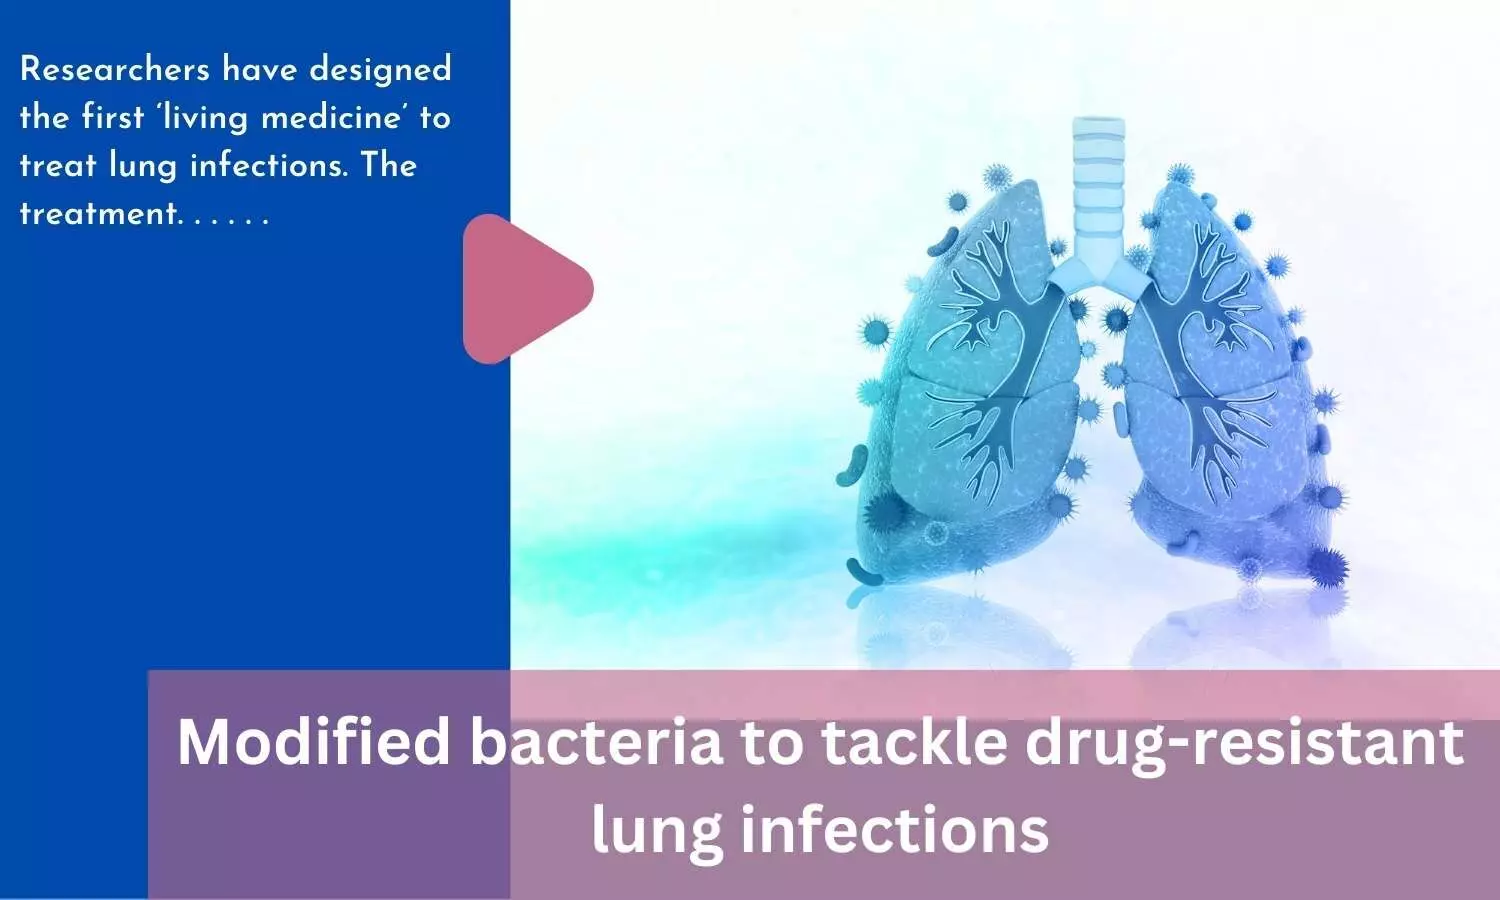 Modified bacteria to tackle drug-resistant lung infections